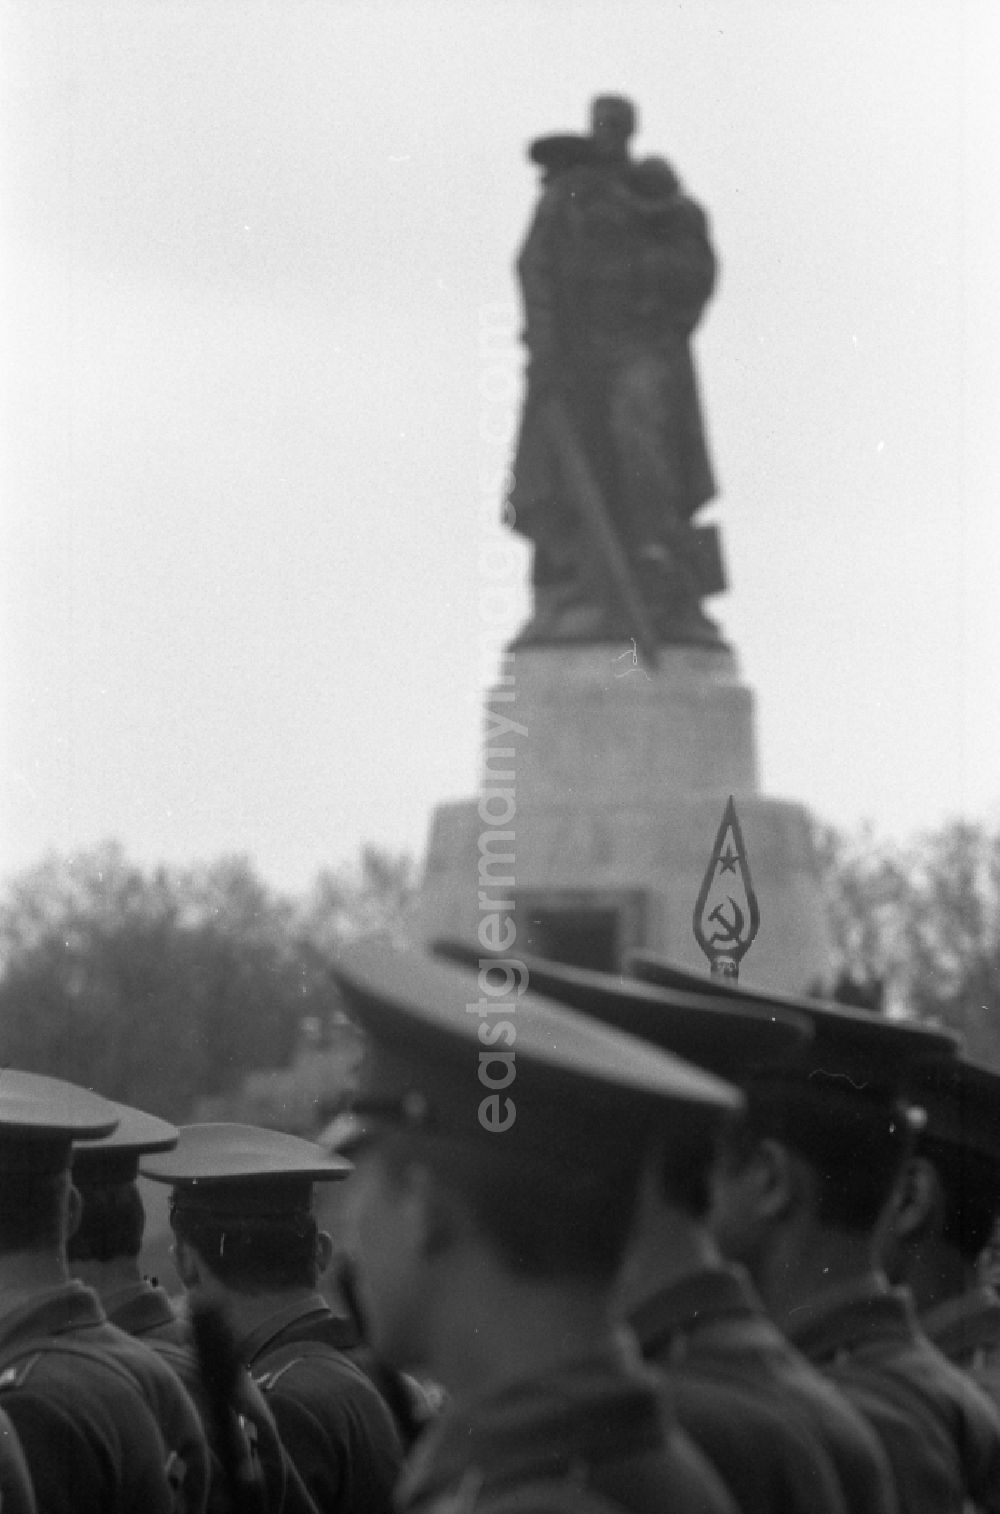 GDR picture archive: Berlin - Parade formation and march of Russian - Soviet soldiers and officers of the GSSD group on the occasion of a wreath-laying ceremony at the memorial for the fallen Soviet soldiers in the district of Treptow in Berlin East Berlin on the territory of the former GDR, German Democratic Republic